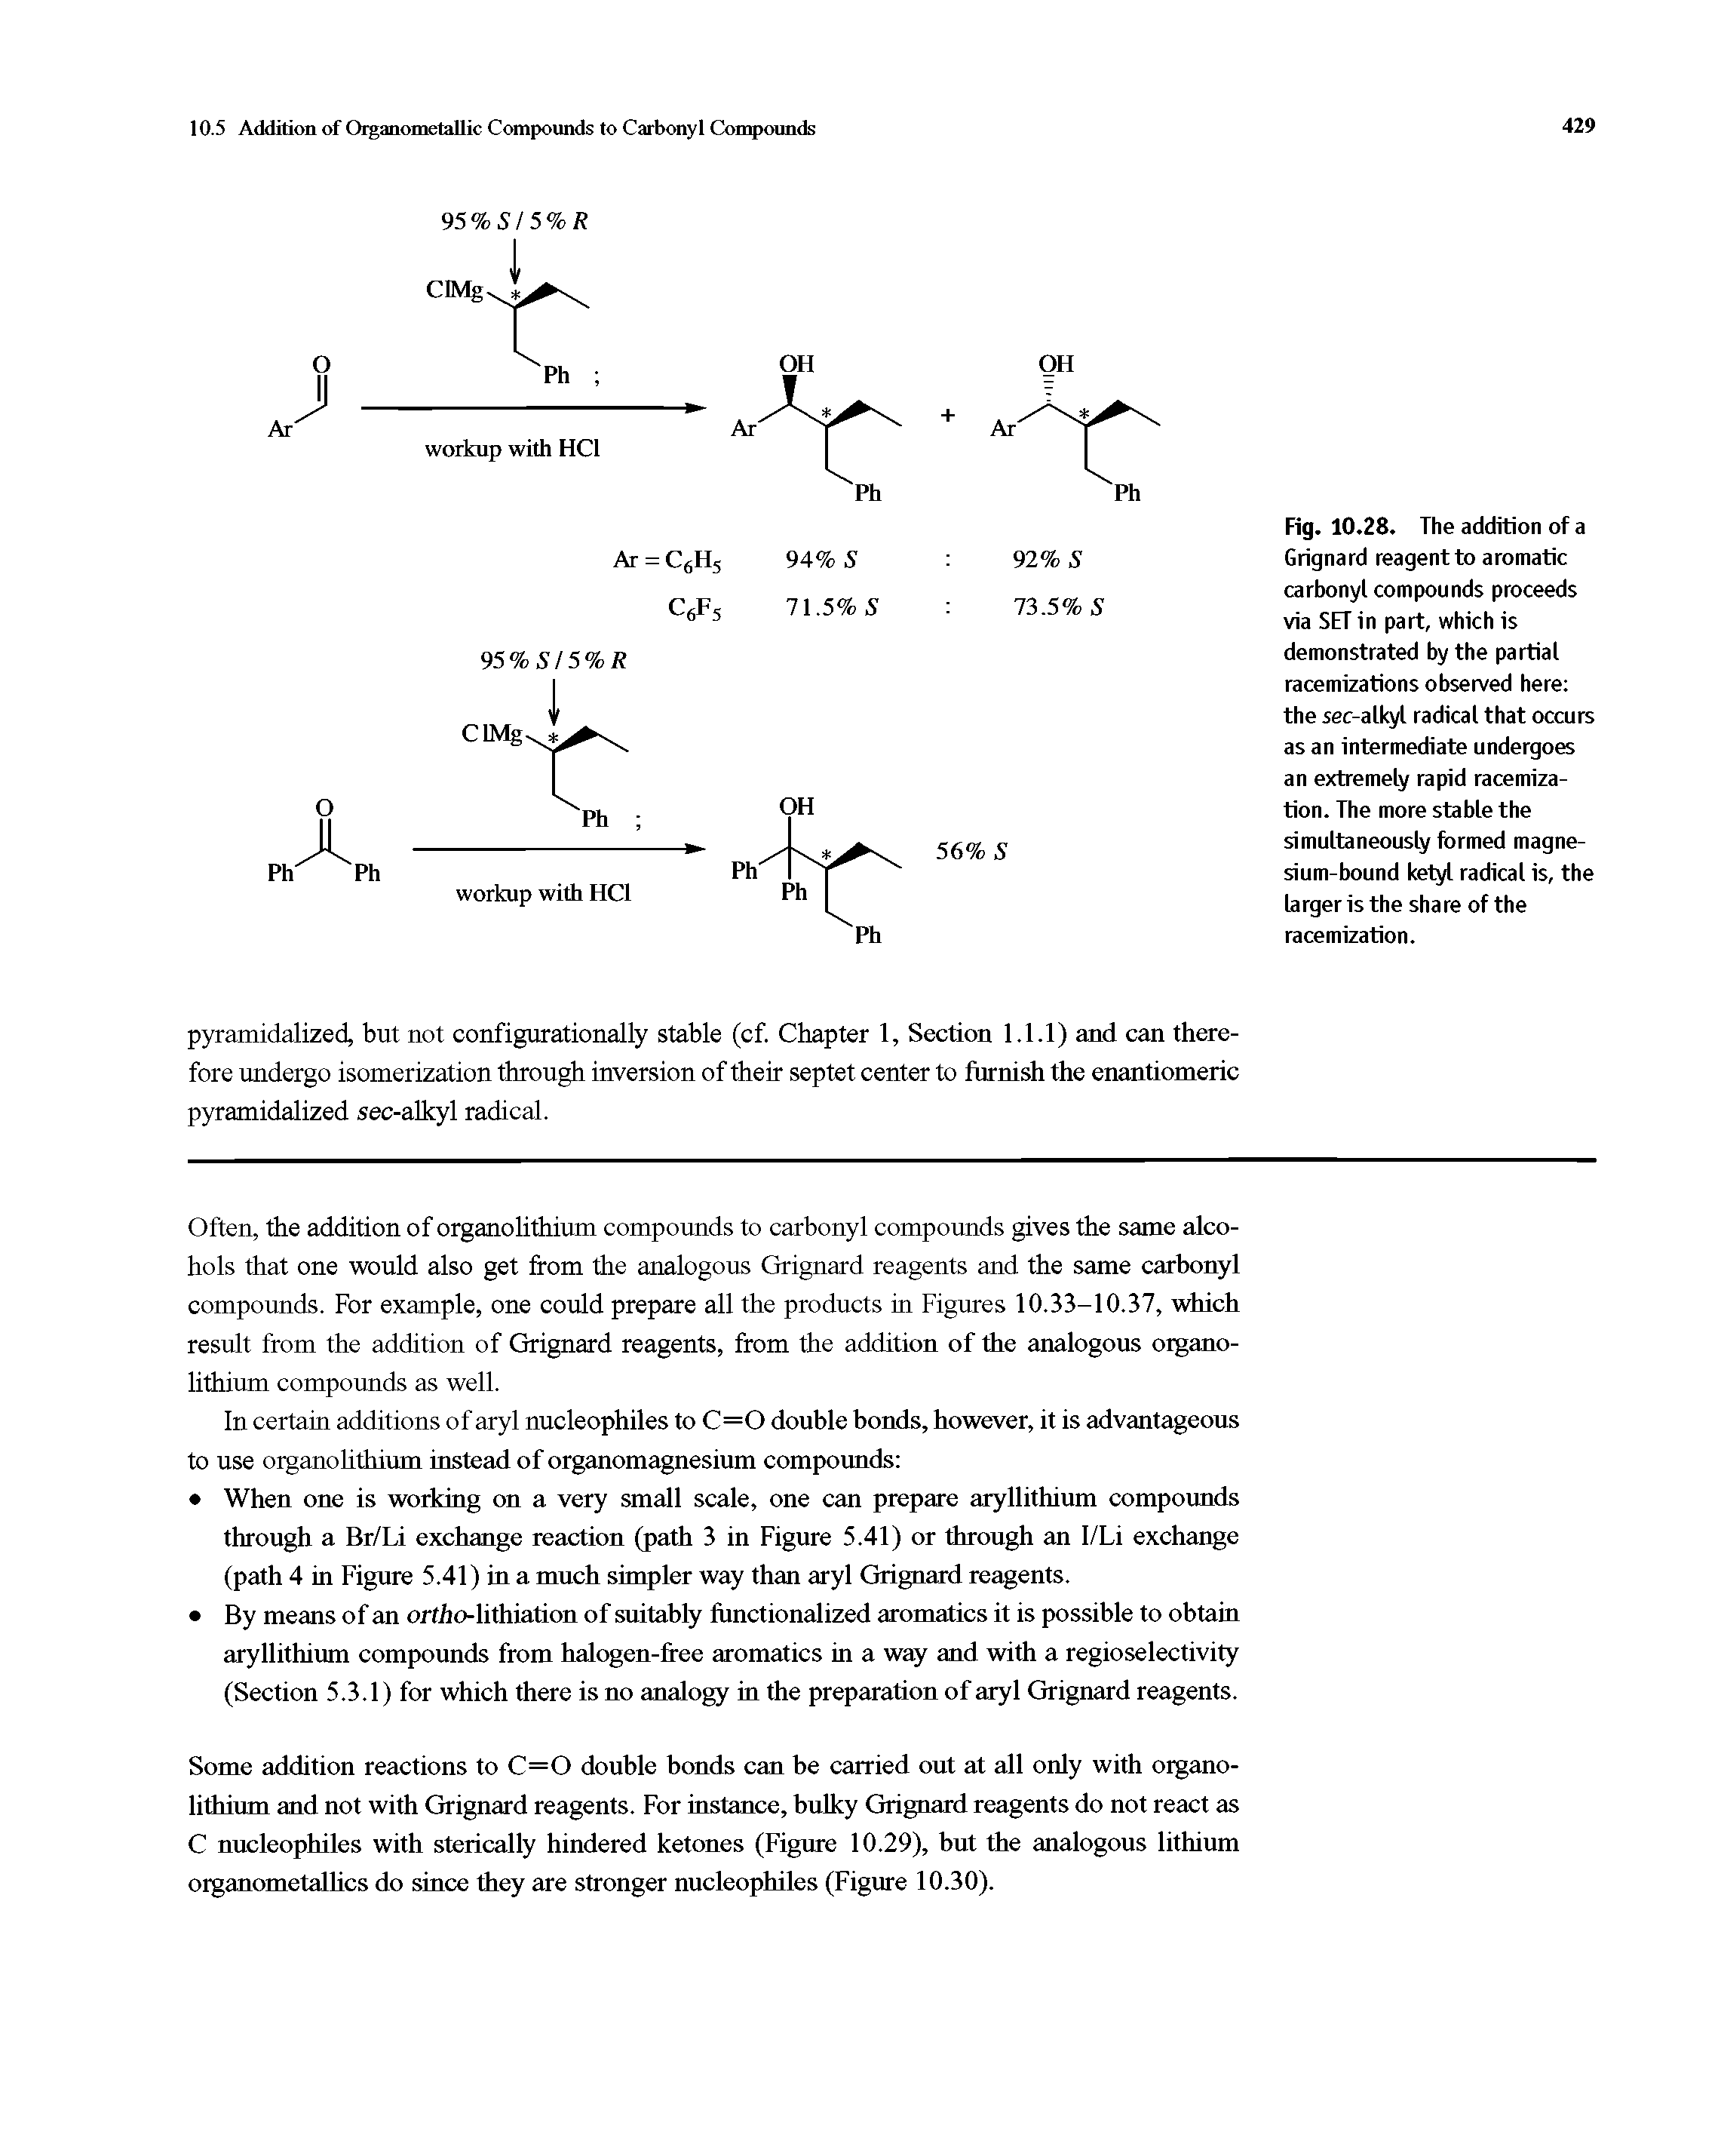 Fig. 10.28. The addition of a Grignard reagent to aromatic carbonyl compounds proceeds via SET in part, which is demonstrated by the partial racemizations observed here the sec-alkyl radical that occurs as an intermediate undergoes an extremely rapid racemiza-tion. The more stable the simultaneously formed magnesium-bound ketyl radical is, the larger is the share of the racemization.